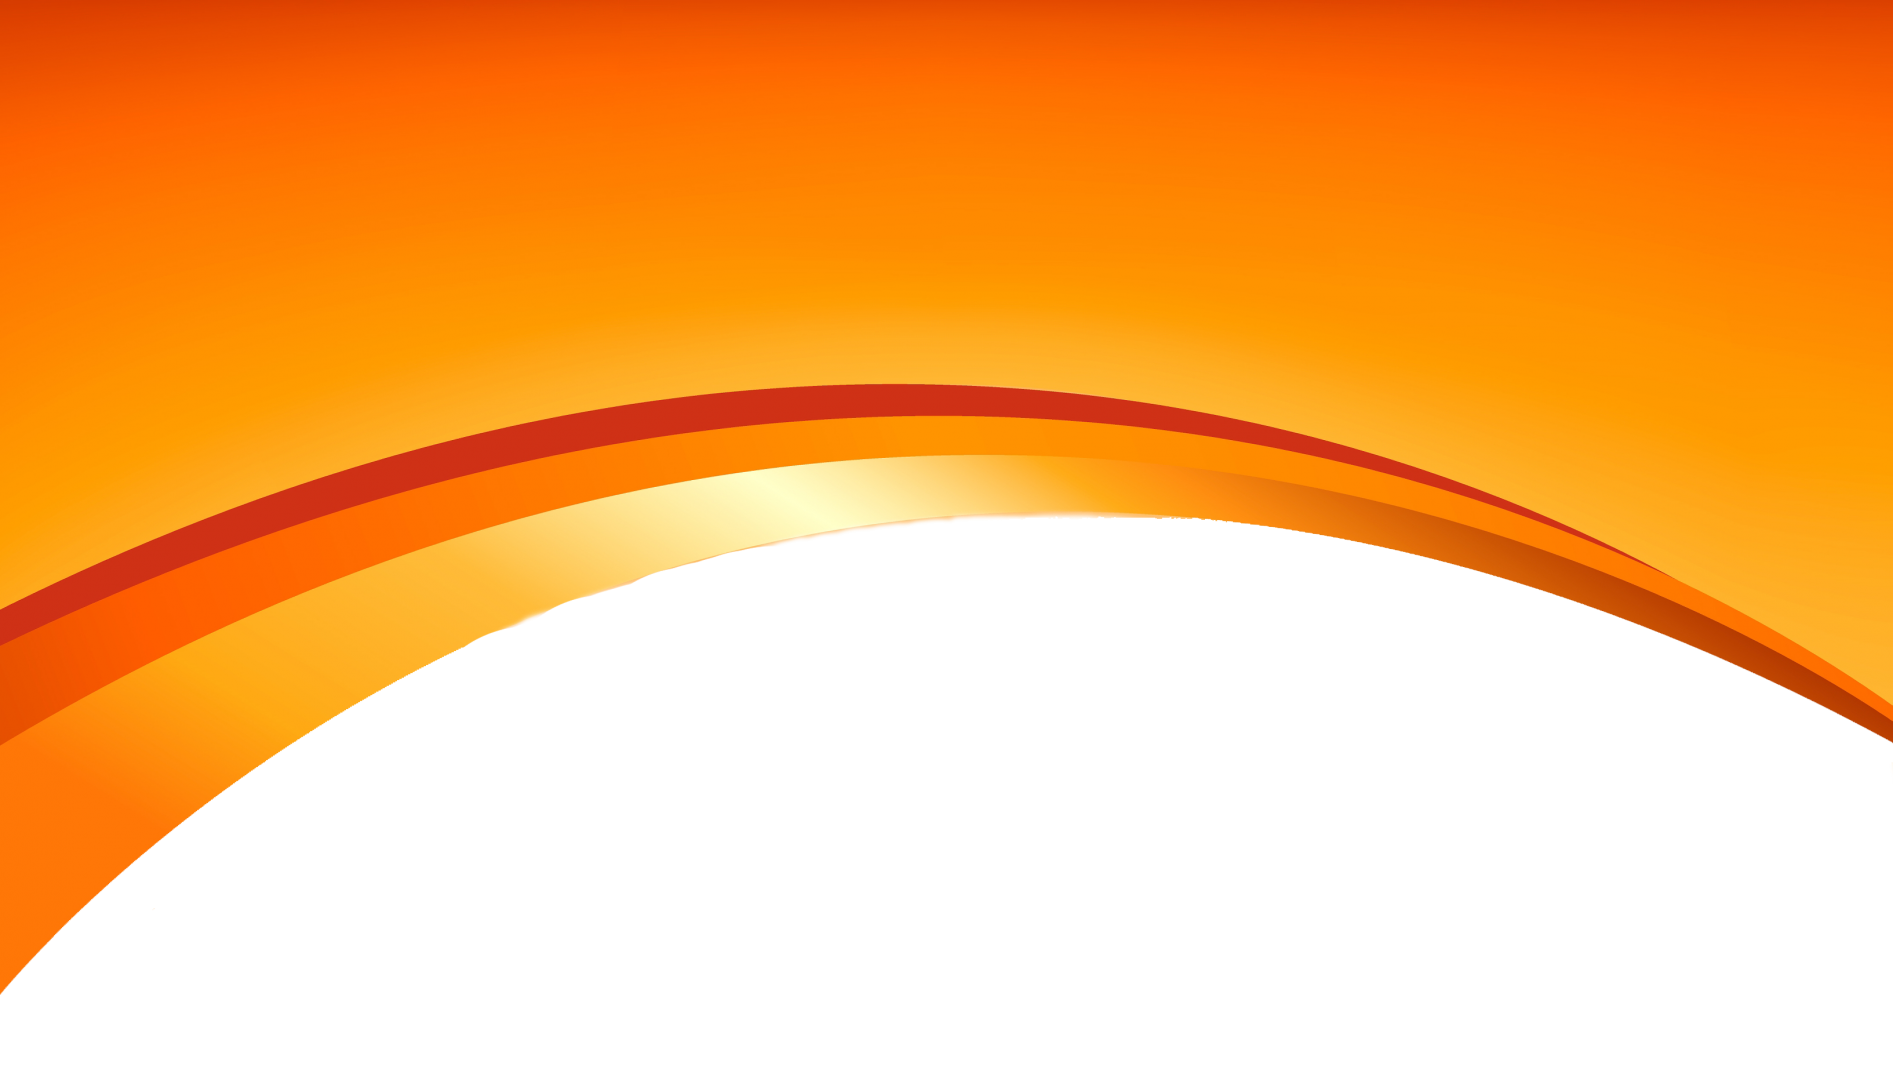 Gallery For Gt Orange Background Png